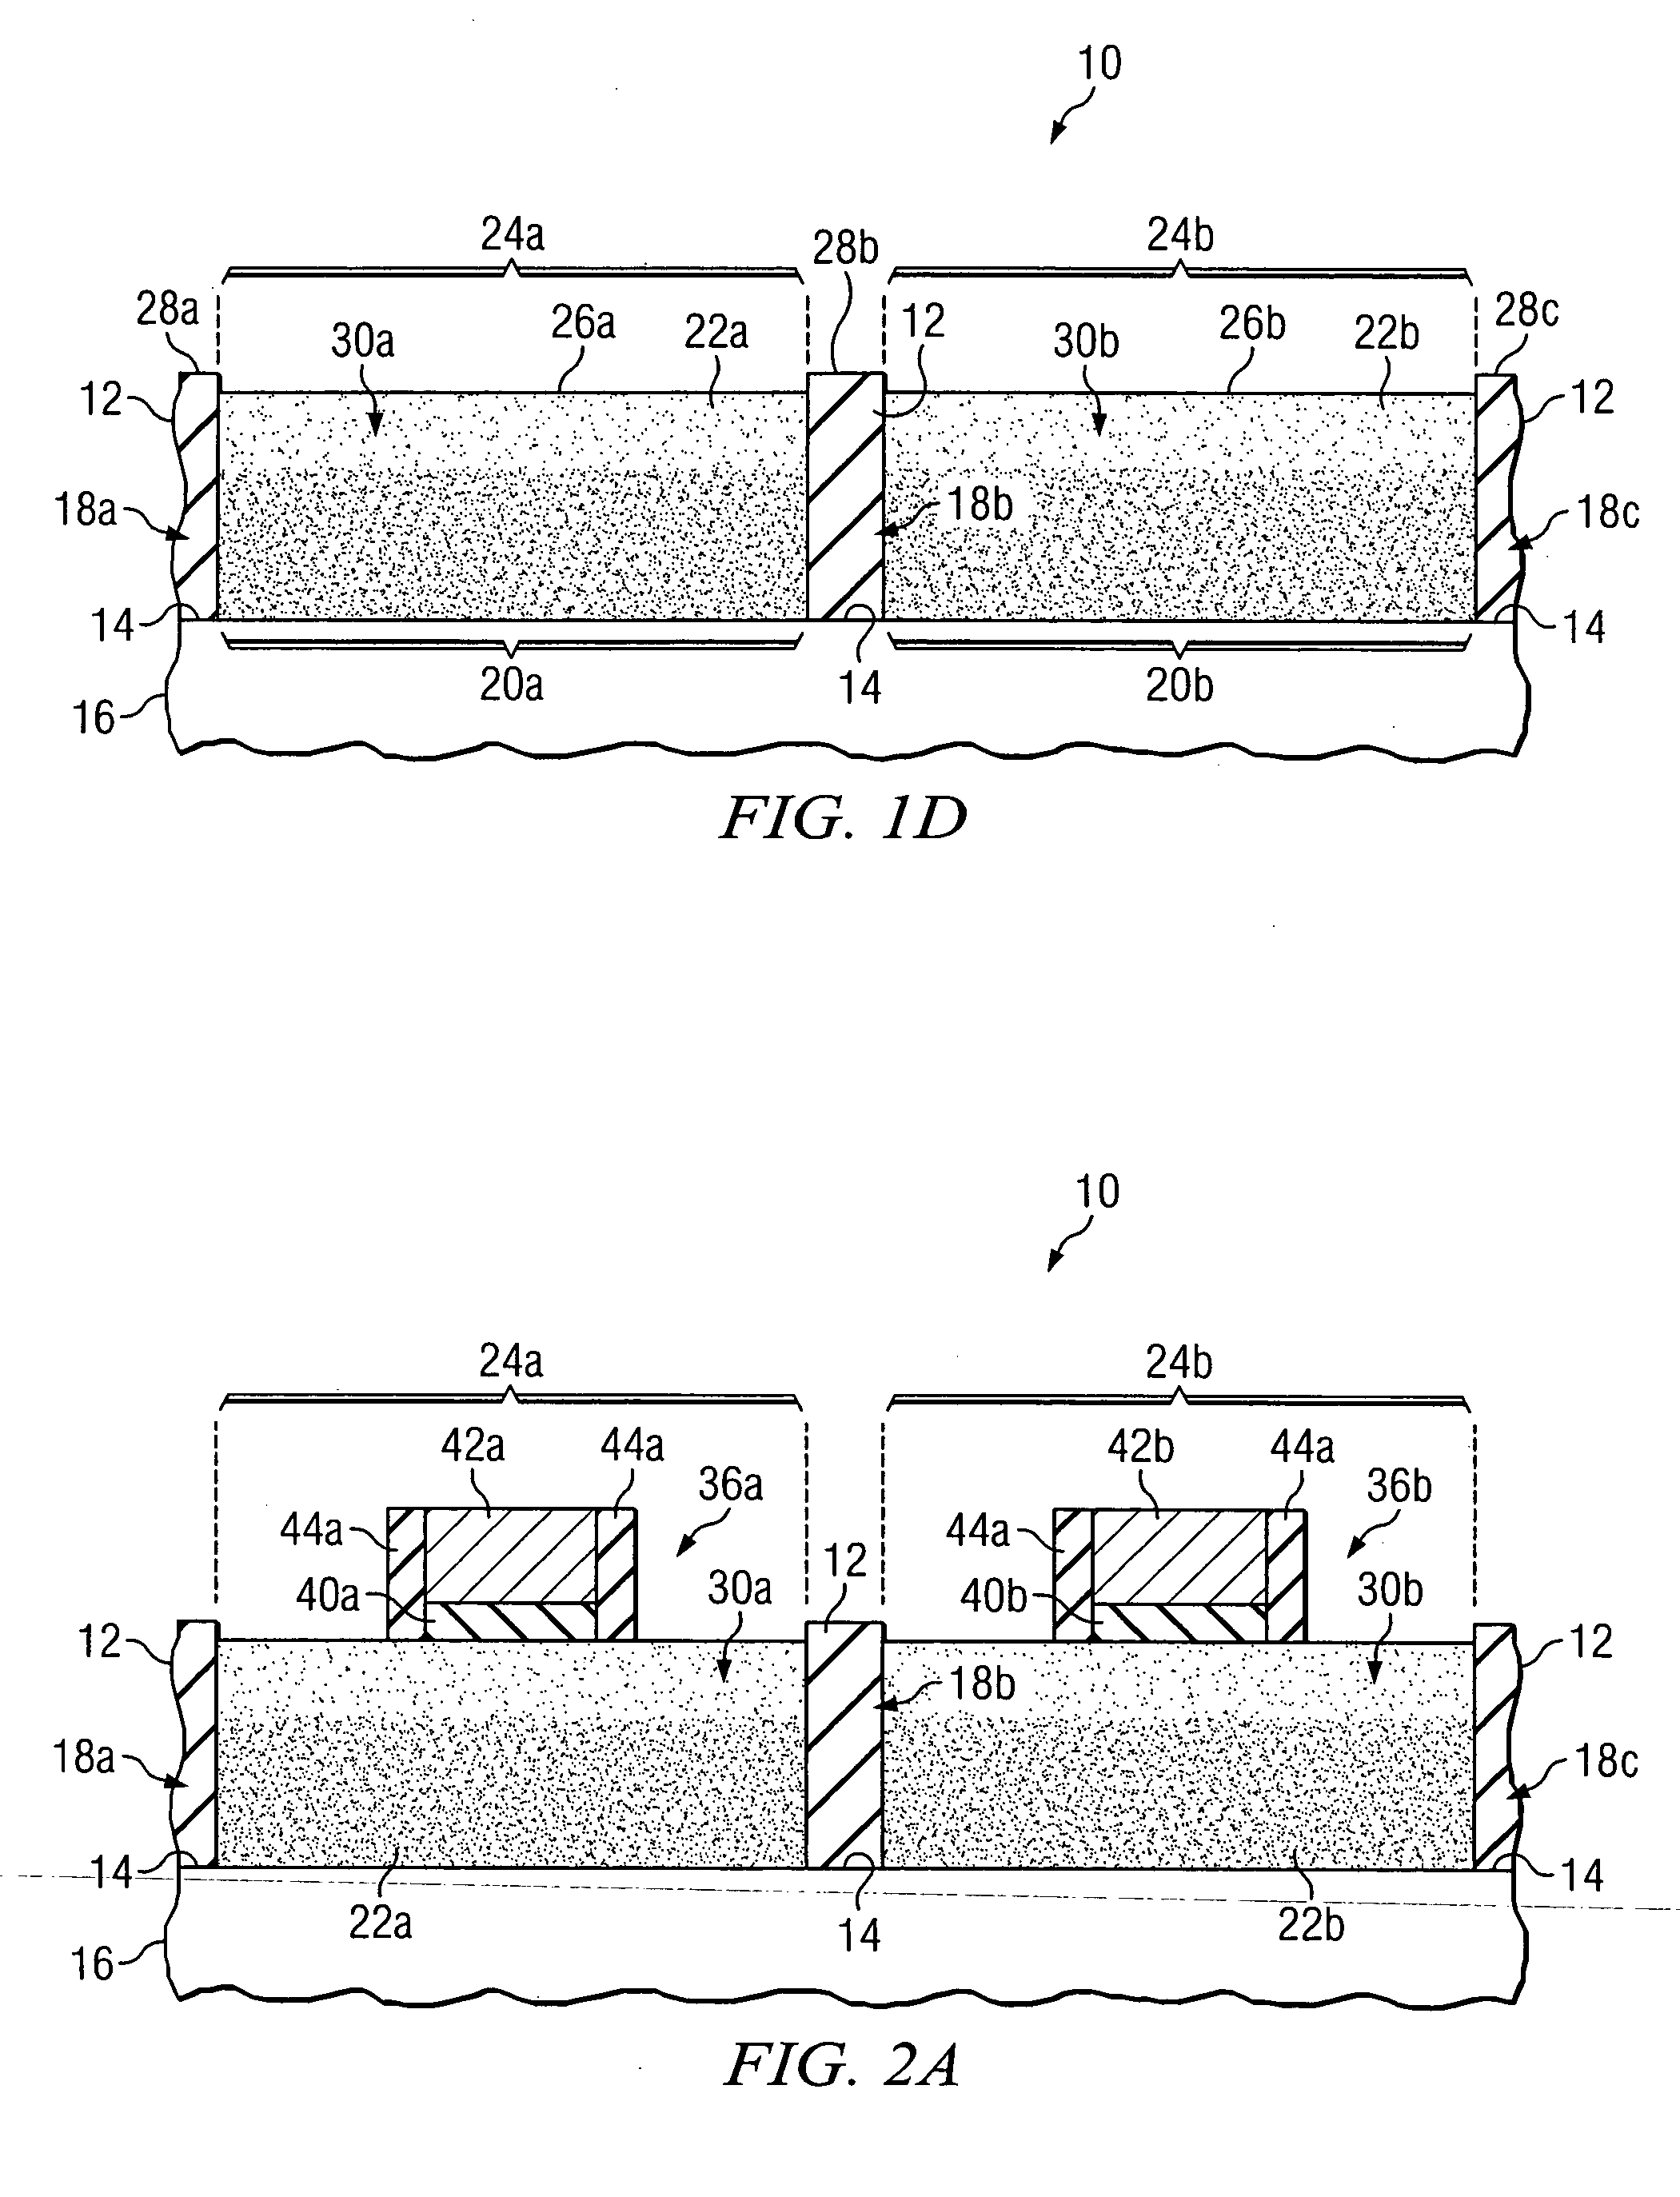 Forming a semiconductor structure in manufacturing a semiconductor device using one or more epitaxial growth processes